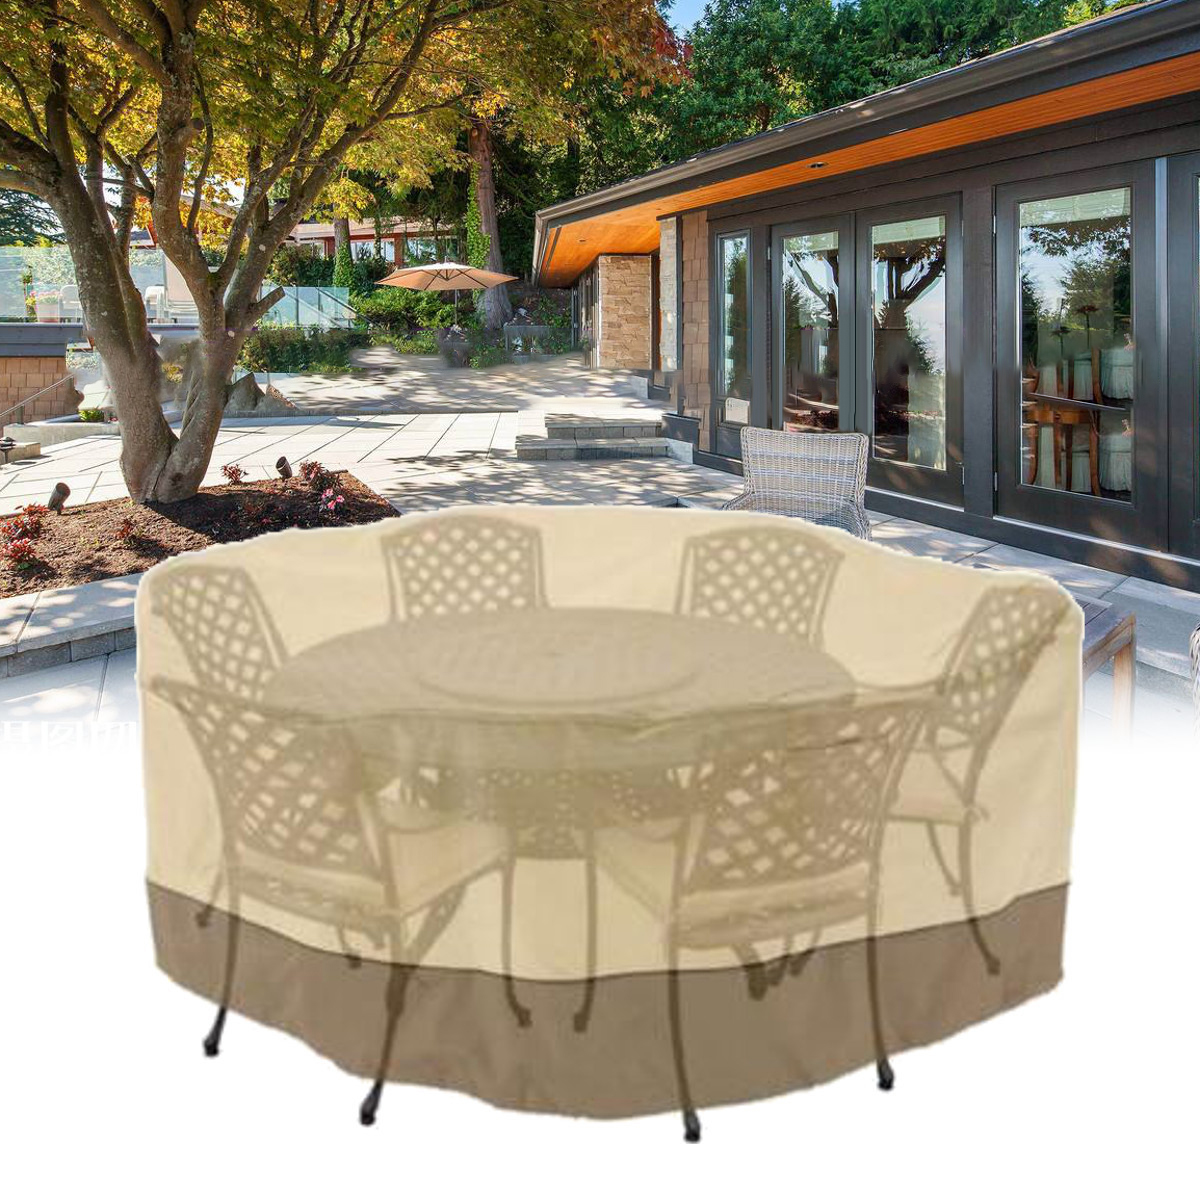 Garden Round Waterproof Table Cover Patio Outdoor Furniture Set Shelter Protection 2